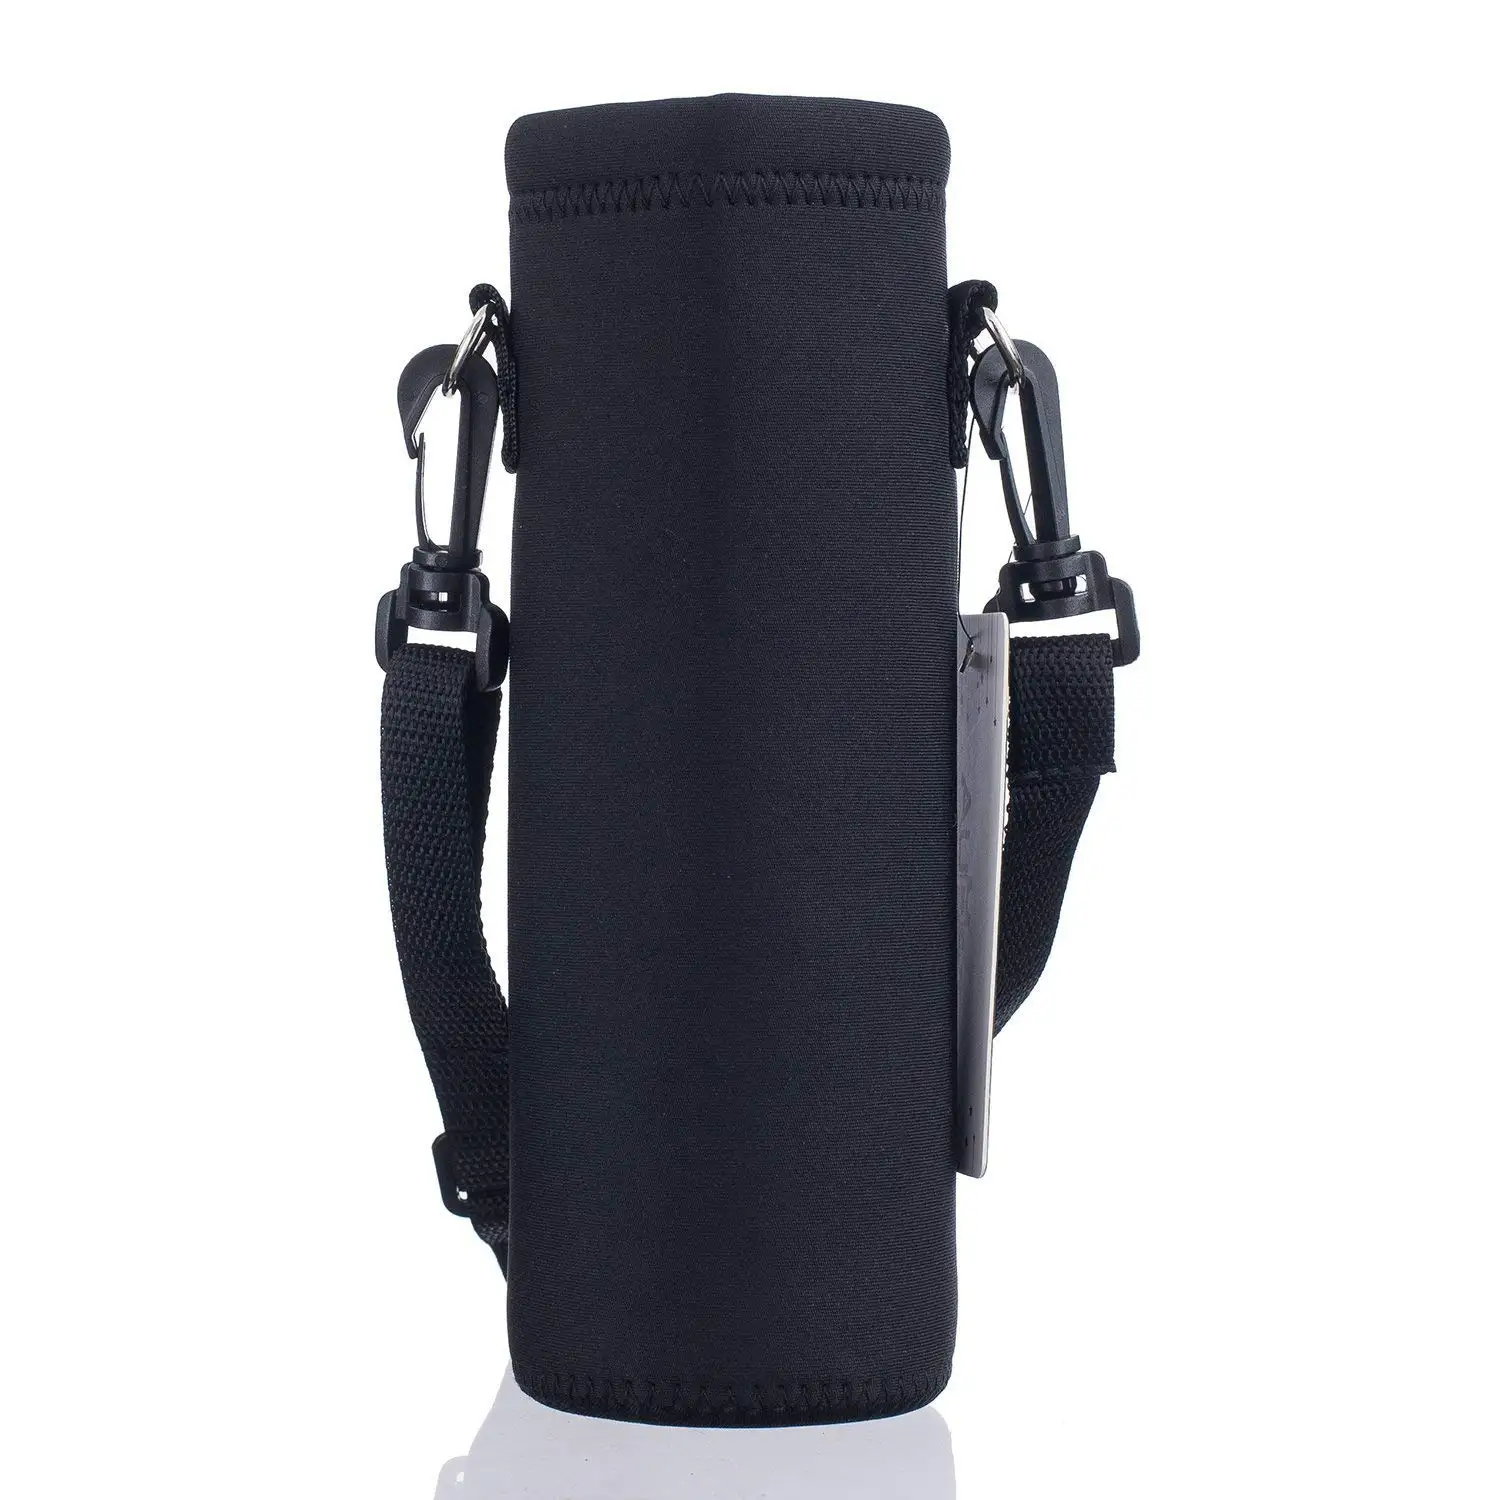 Insulated Water Bottle Holder Bottle Carrier Bag With Detachable ...